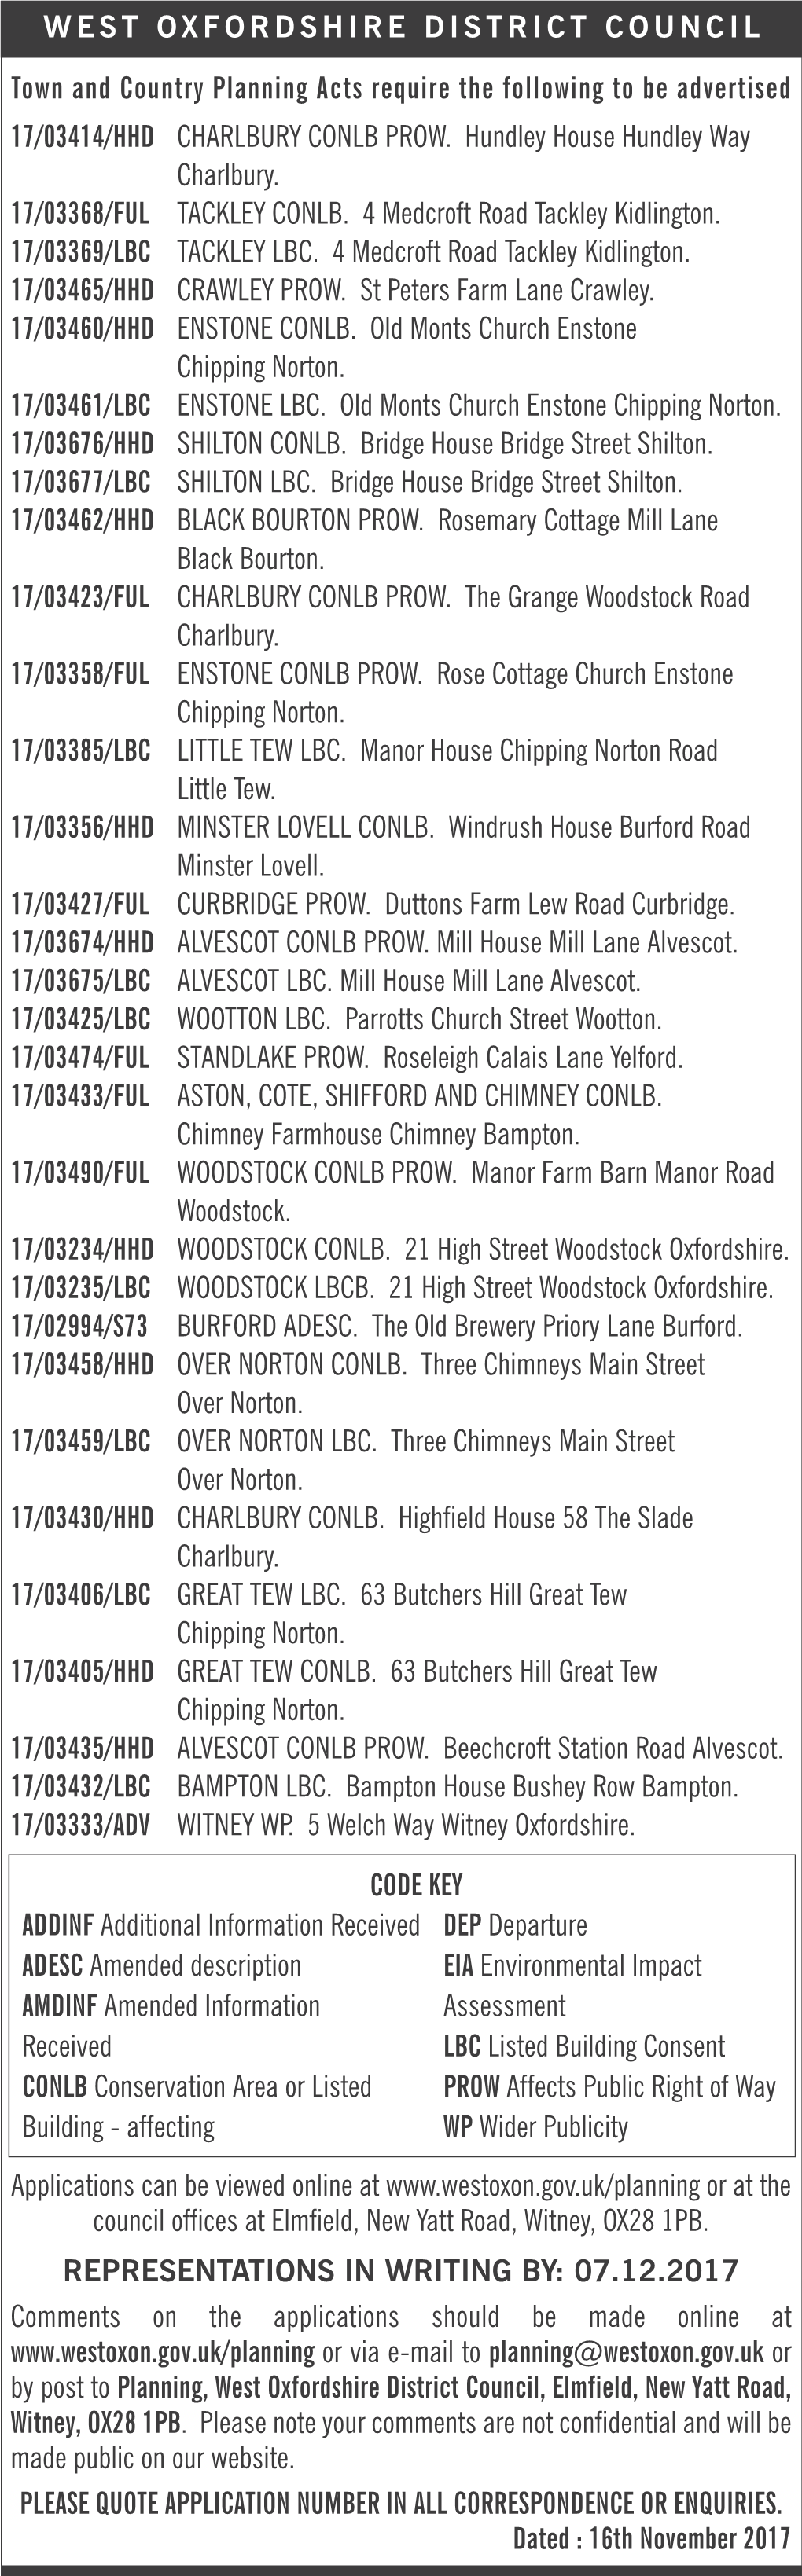 Town and Country Planning Acts Require the Following to Be Advertised 17/03414/HHD CHARLBURY CONLB PROW